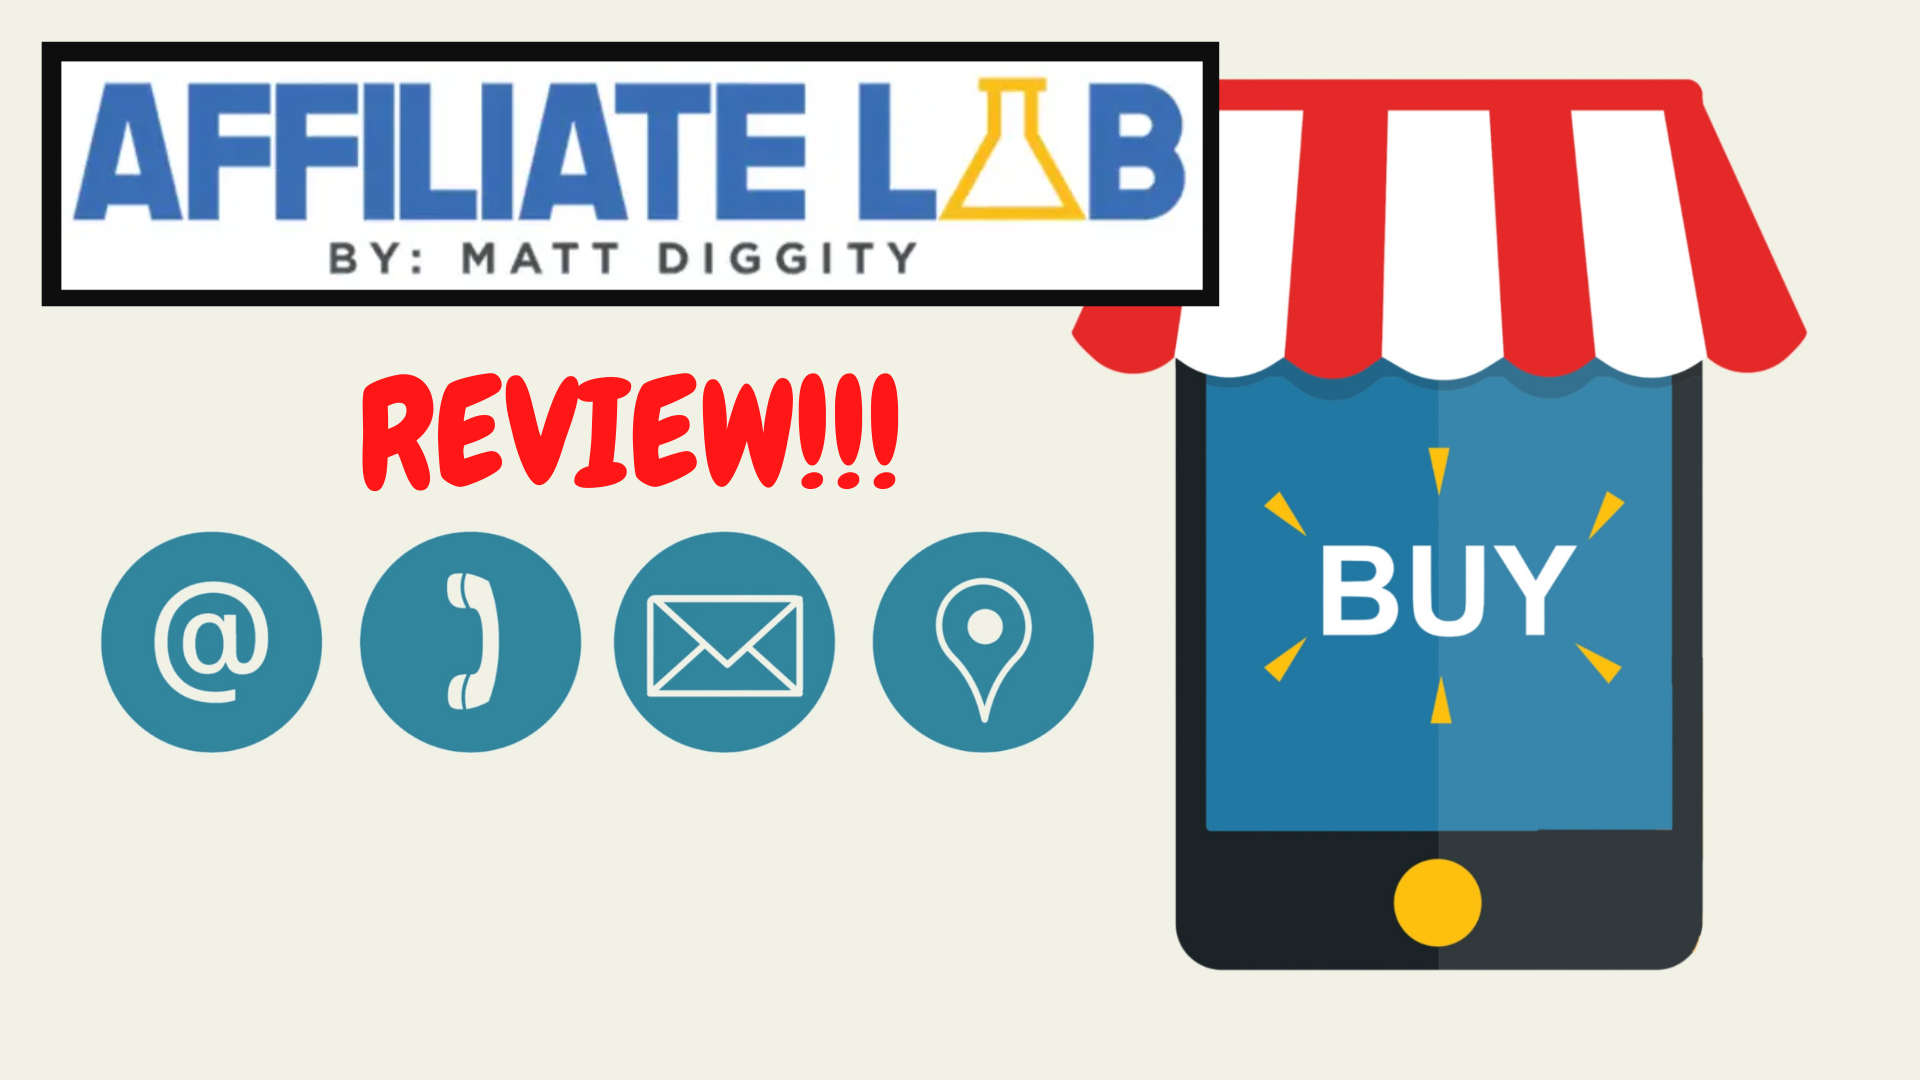 Affiliate Lab Review